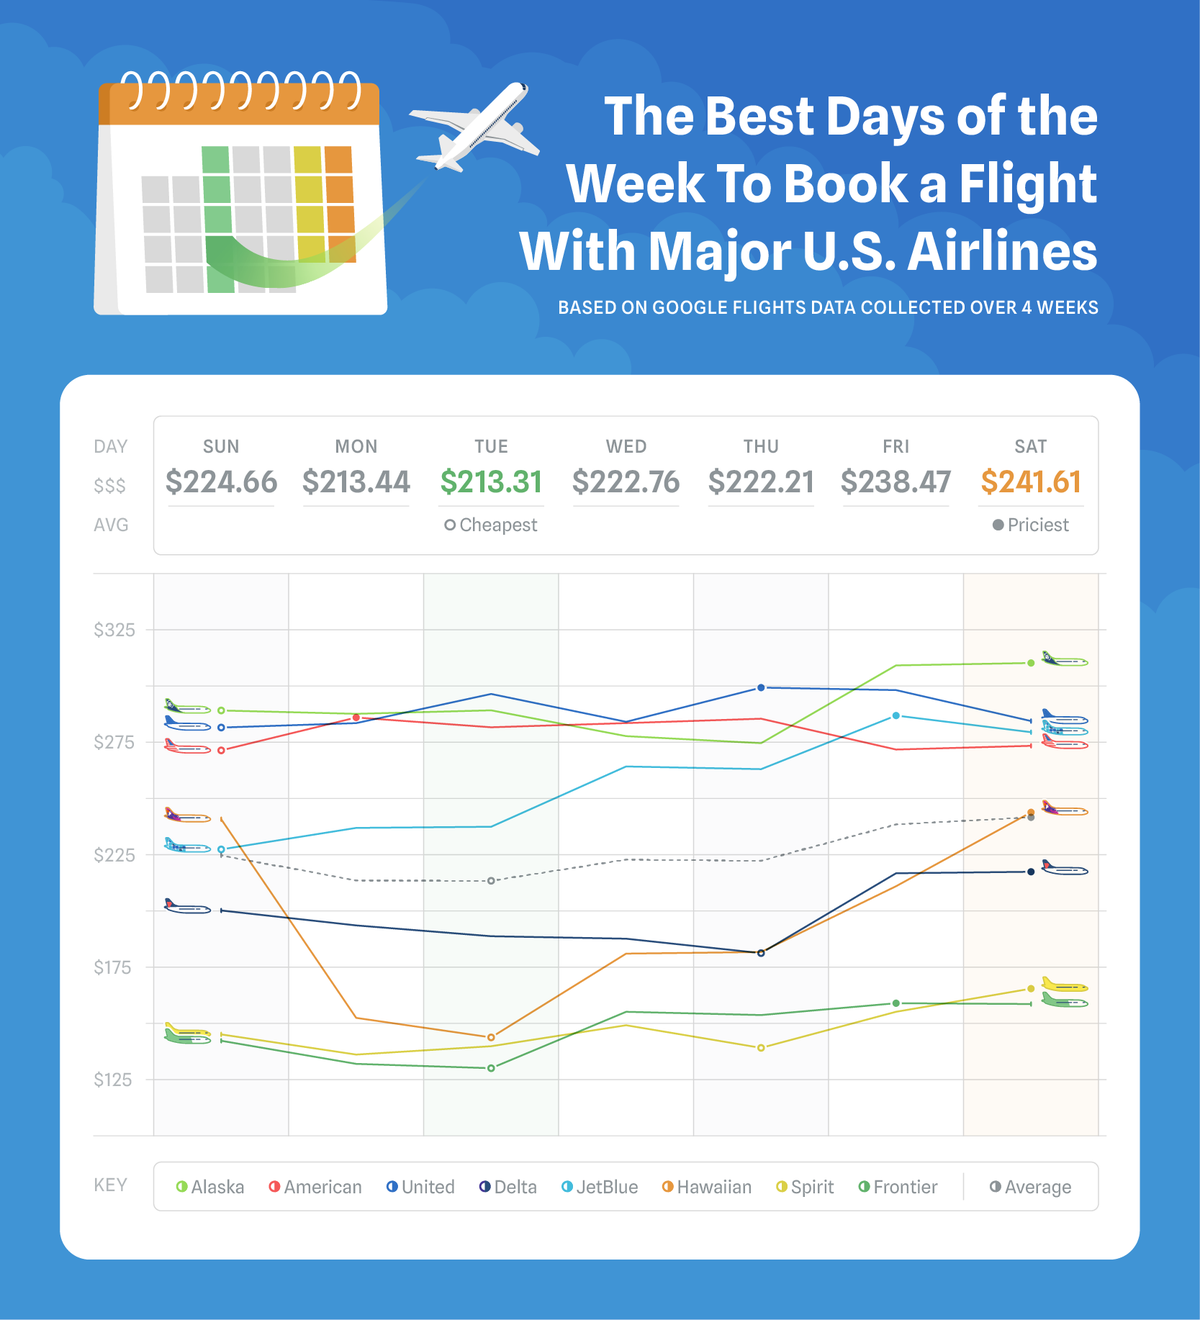 An illustrated line chart showing the cost of booking a flight every day of the week using major U.S. airlines